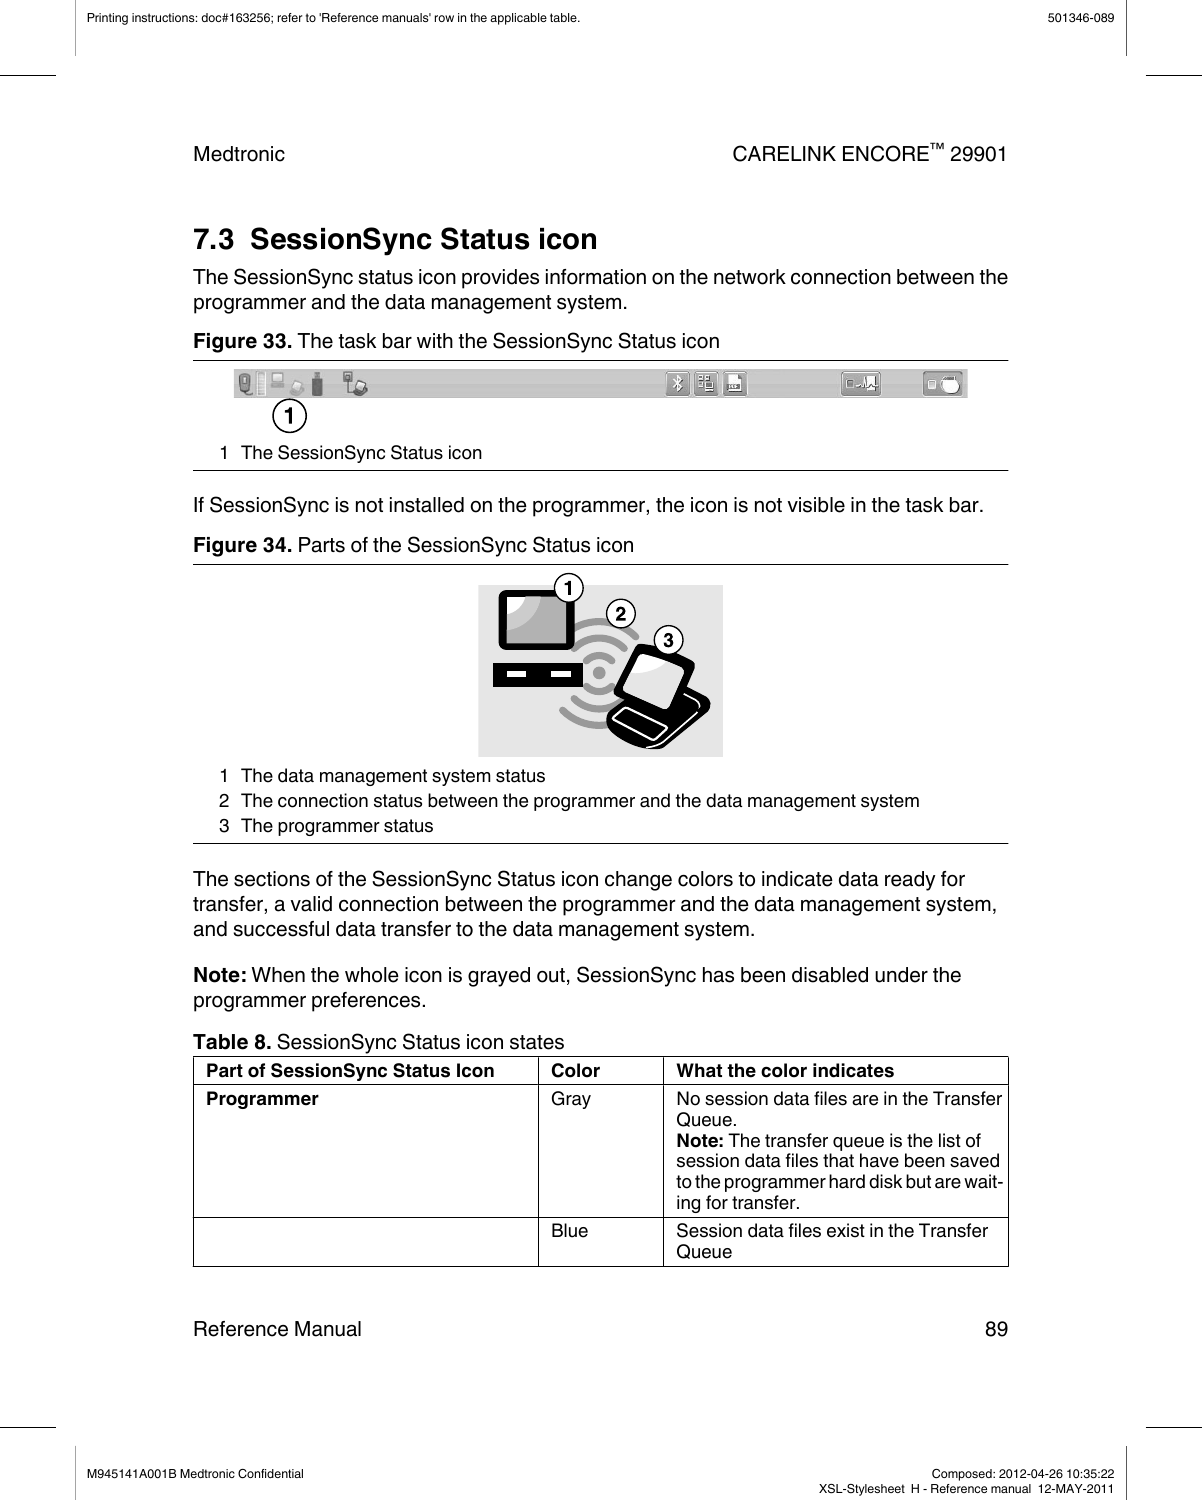 7.3  SessionSync Status iconThe SessionSync status icon provides information on the network connection between theprogrammer and the data management system.Figure 33. The task bar with the SessionSync Status icon1 The SessionSync Status iconIf SessionSync is not installed on the programmer, the icon is not visible in the task bar.Figure 34. Parts of the SessionSync Status icon1 The data management system status2 The connection status between the programmer and the data management system3 The programmer statusThe sections of the SessionSync Status icon change colors to indicate data ready fortransfer, a valid connection between the programmer and the data management system,and successful data transfer to the data management system.Note: When the whole icon is grayed out, SessionSync has been disabled under theprogrammer preferences.Table 8. SessionSync Status icon statesPart of SessionSync Status Icon Color What the color indicatesProgrammer Gray No session data files are in the TransferQueue.Note: The transfer queue is the list ofsession data files that have been savedto the programmer hard disk but are wait-ing for transfer.Blue Session data files exist in the TransferQueuePrinting instructions: doc#163256; refer to &apos;Reference manuals&apos; row in the applicable table. 501346-089Medtronic CARELINK ENCORE™ 29901Reference Manual 89M945141A001B Medtronic Confidential   Composed: 2012-04-26 10:35:22XSL-Stylesheet  H - Reference manual  12-MAY-2011